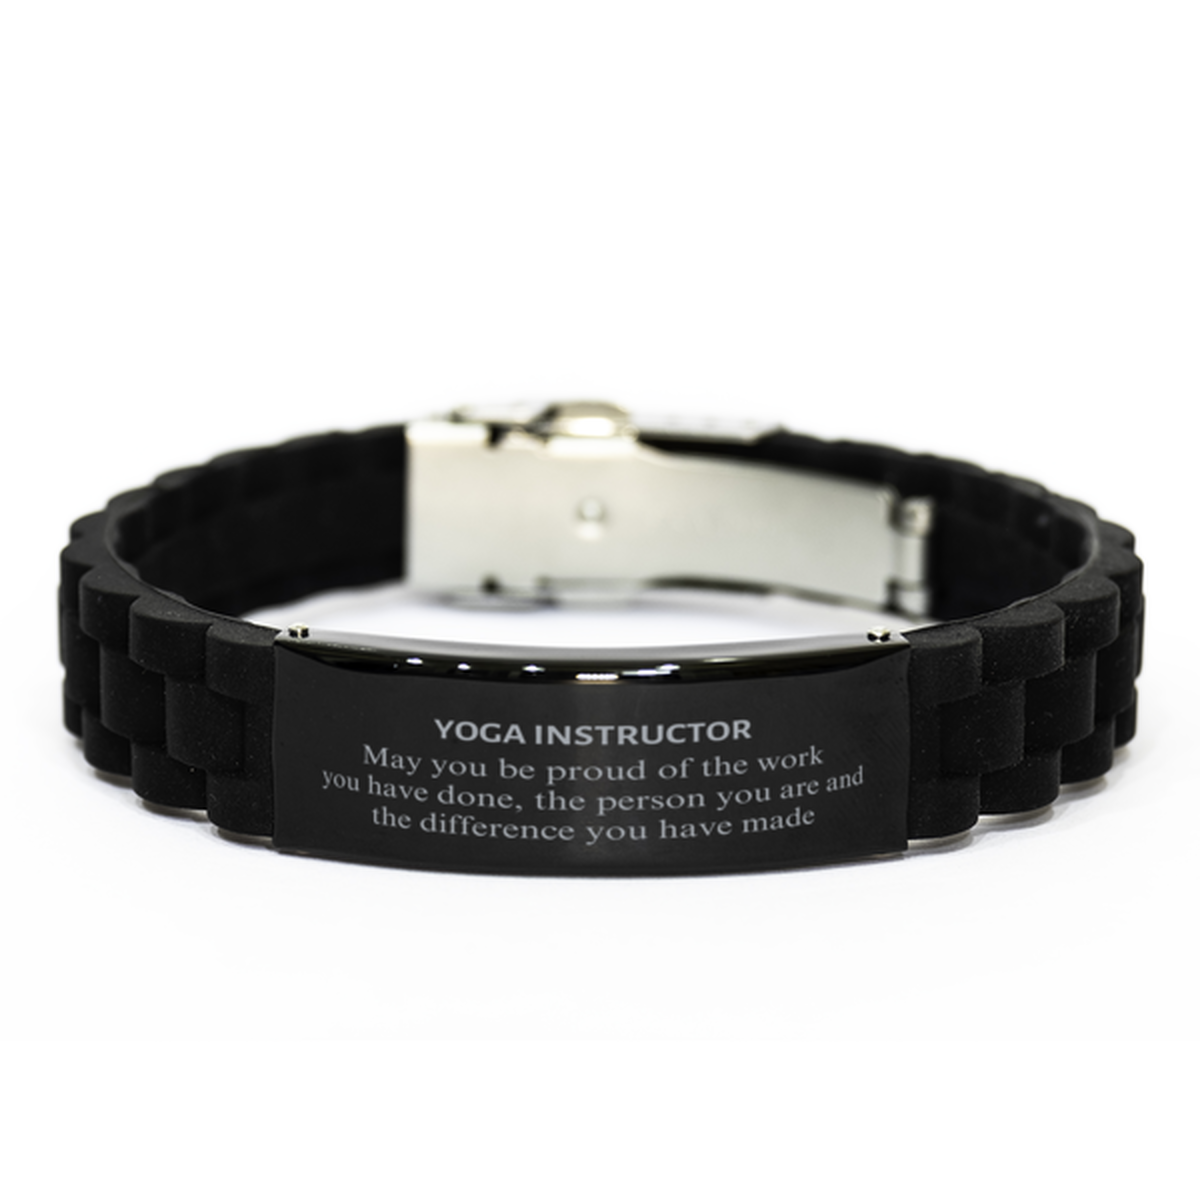 Yoga Instructor May you be proud of the work you have done, Retirement Yoga Instructor Black Glidelock Clasp Bracelet for Colleague Appreciation Gifts Amazing for Yoga Instructor